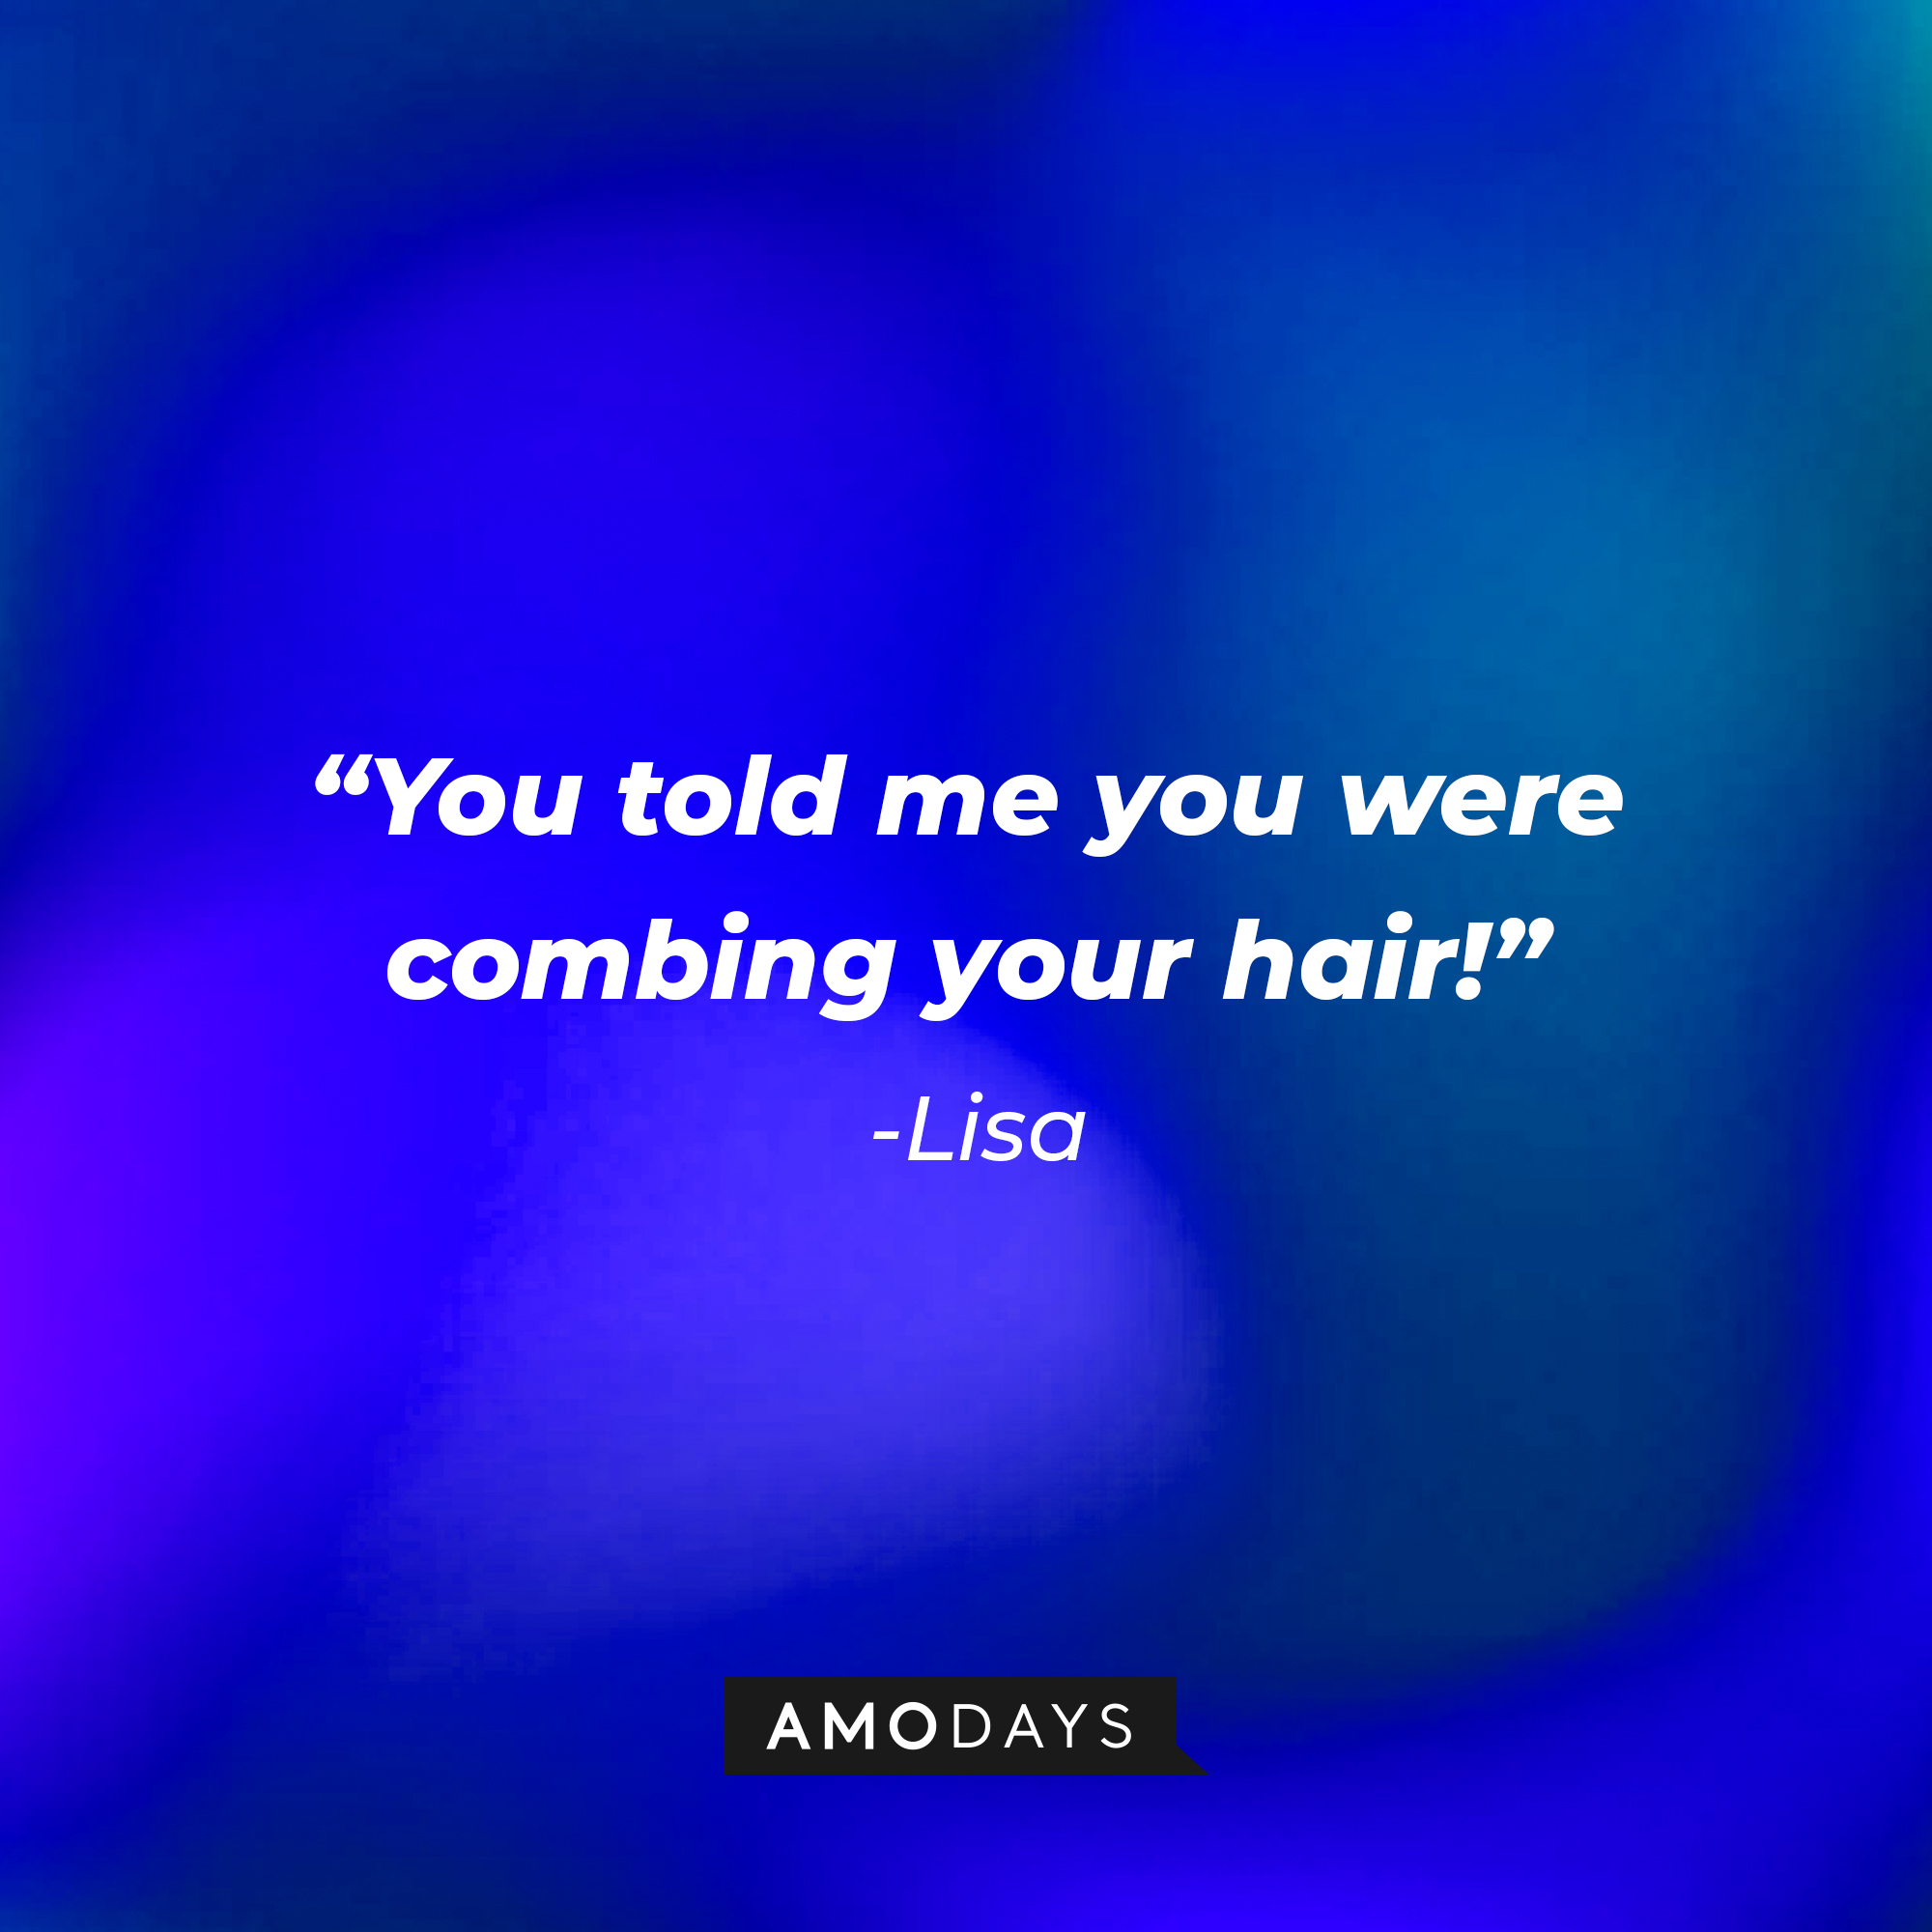 Lisa’s quote: “You told me you were combing your hair!” | Source: AmoDays